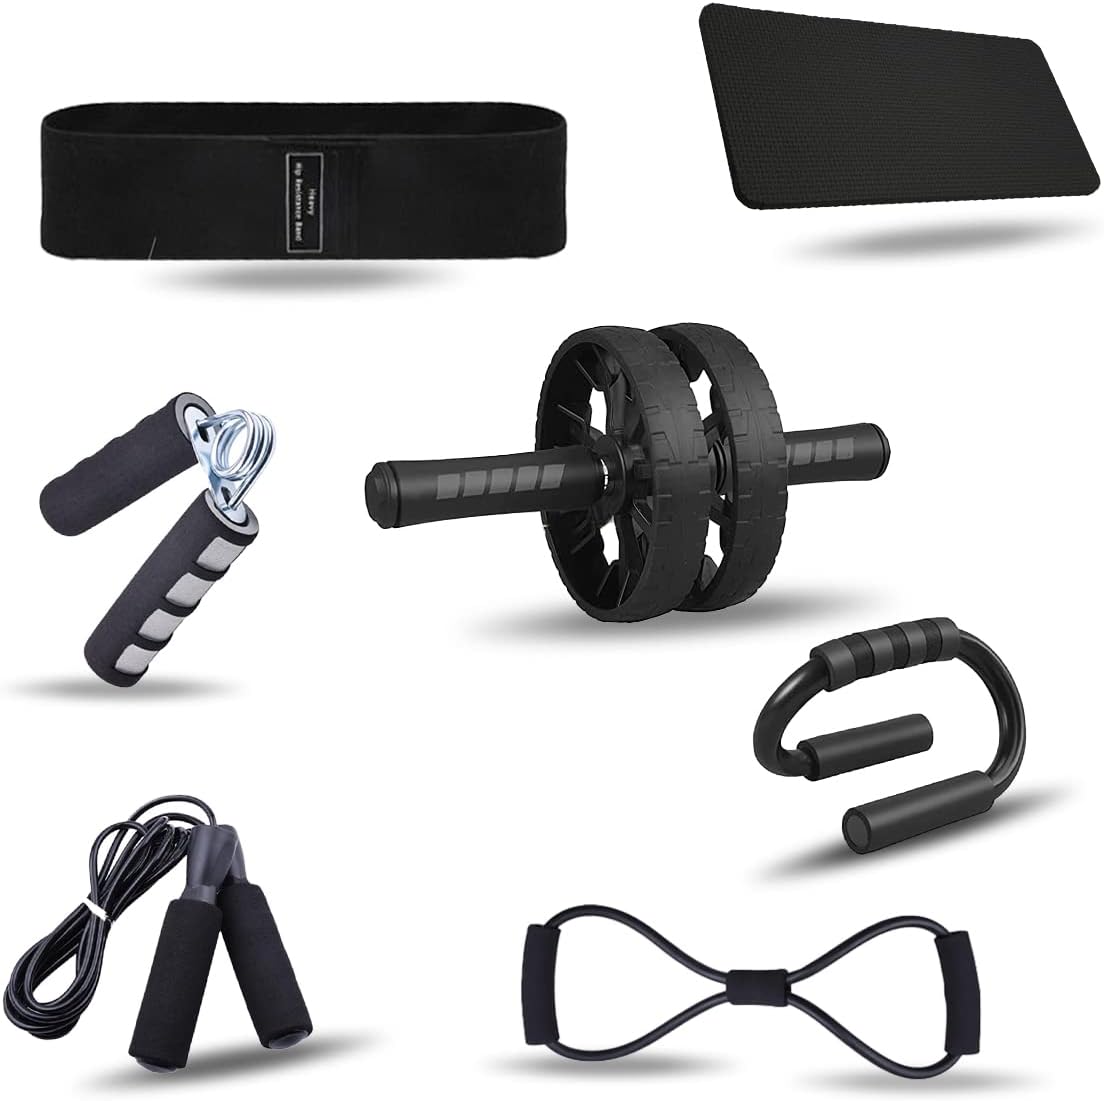 Gym Equipment for Home Workout Fitness Equipment, Abdominal Exercise, Ab Roller Set Kit with Push-Up Bar, hand exercisers Skipping Rope and Knee Pad Strength 7 in 1